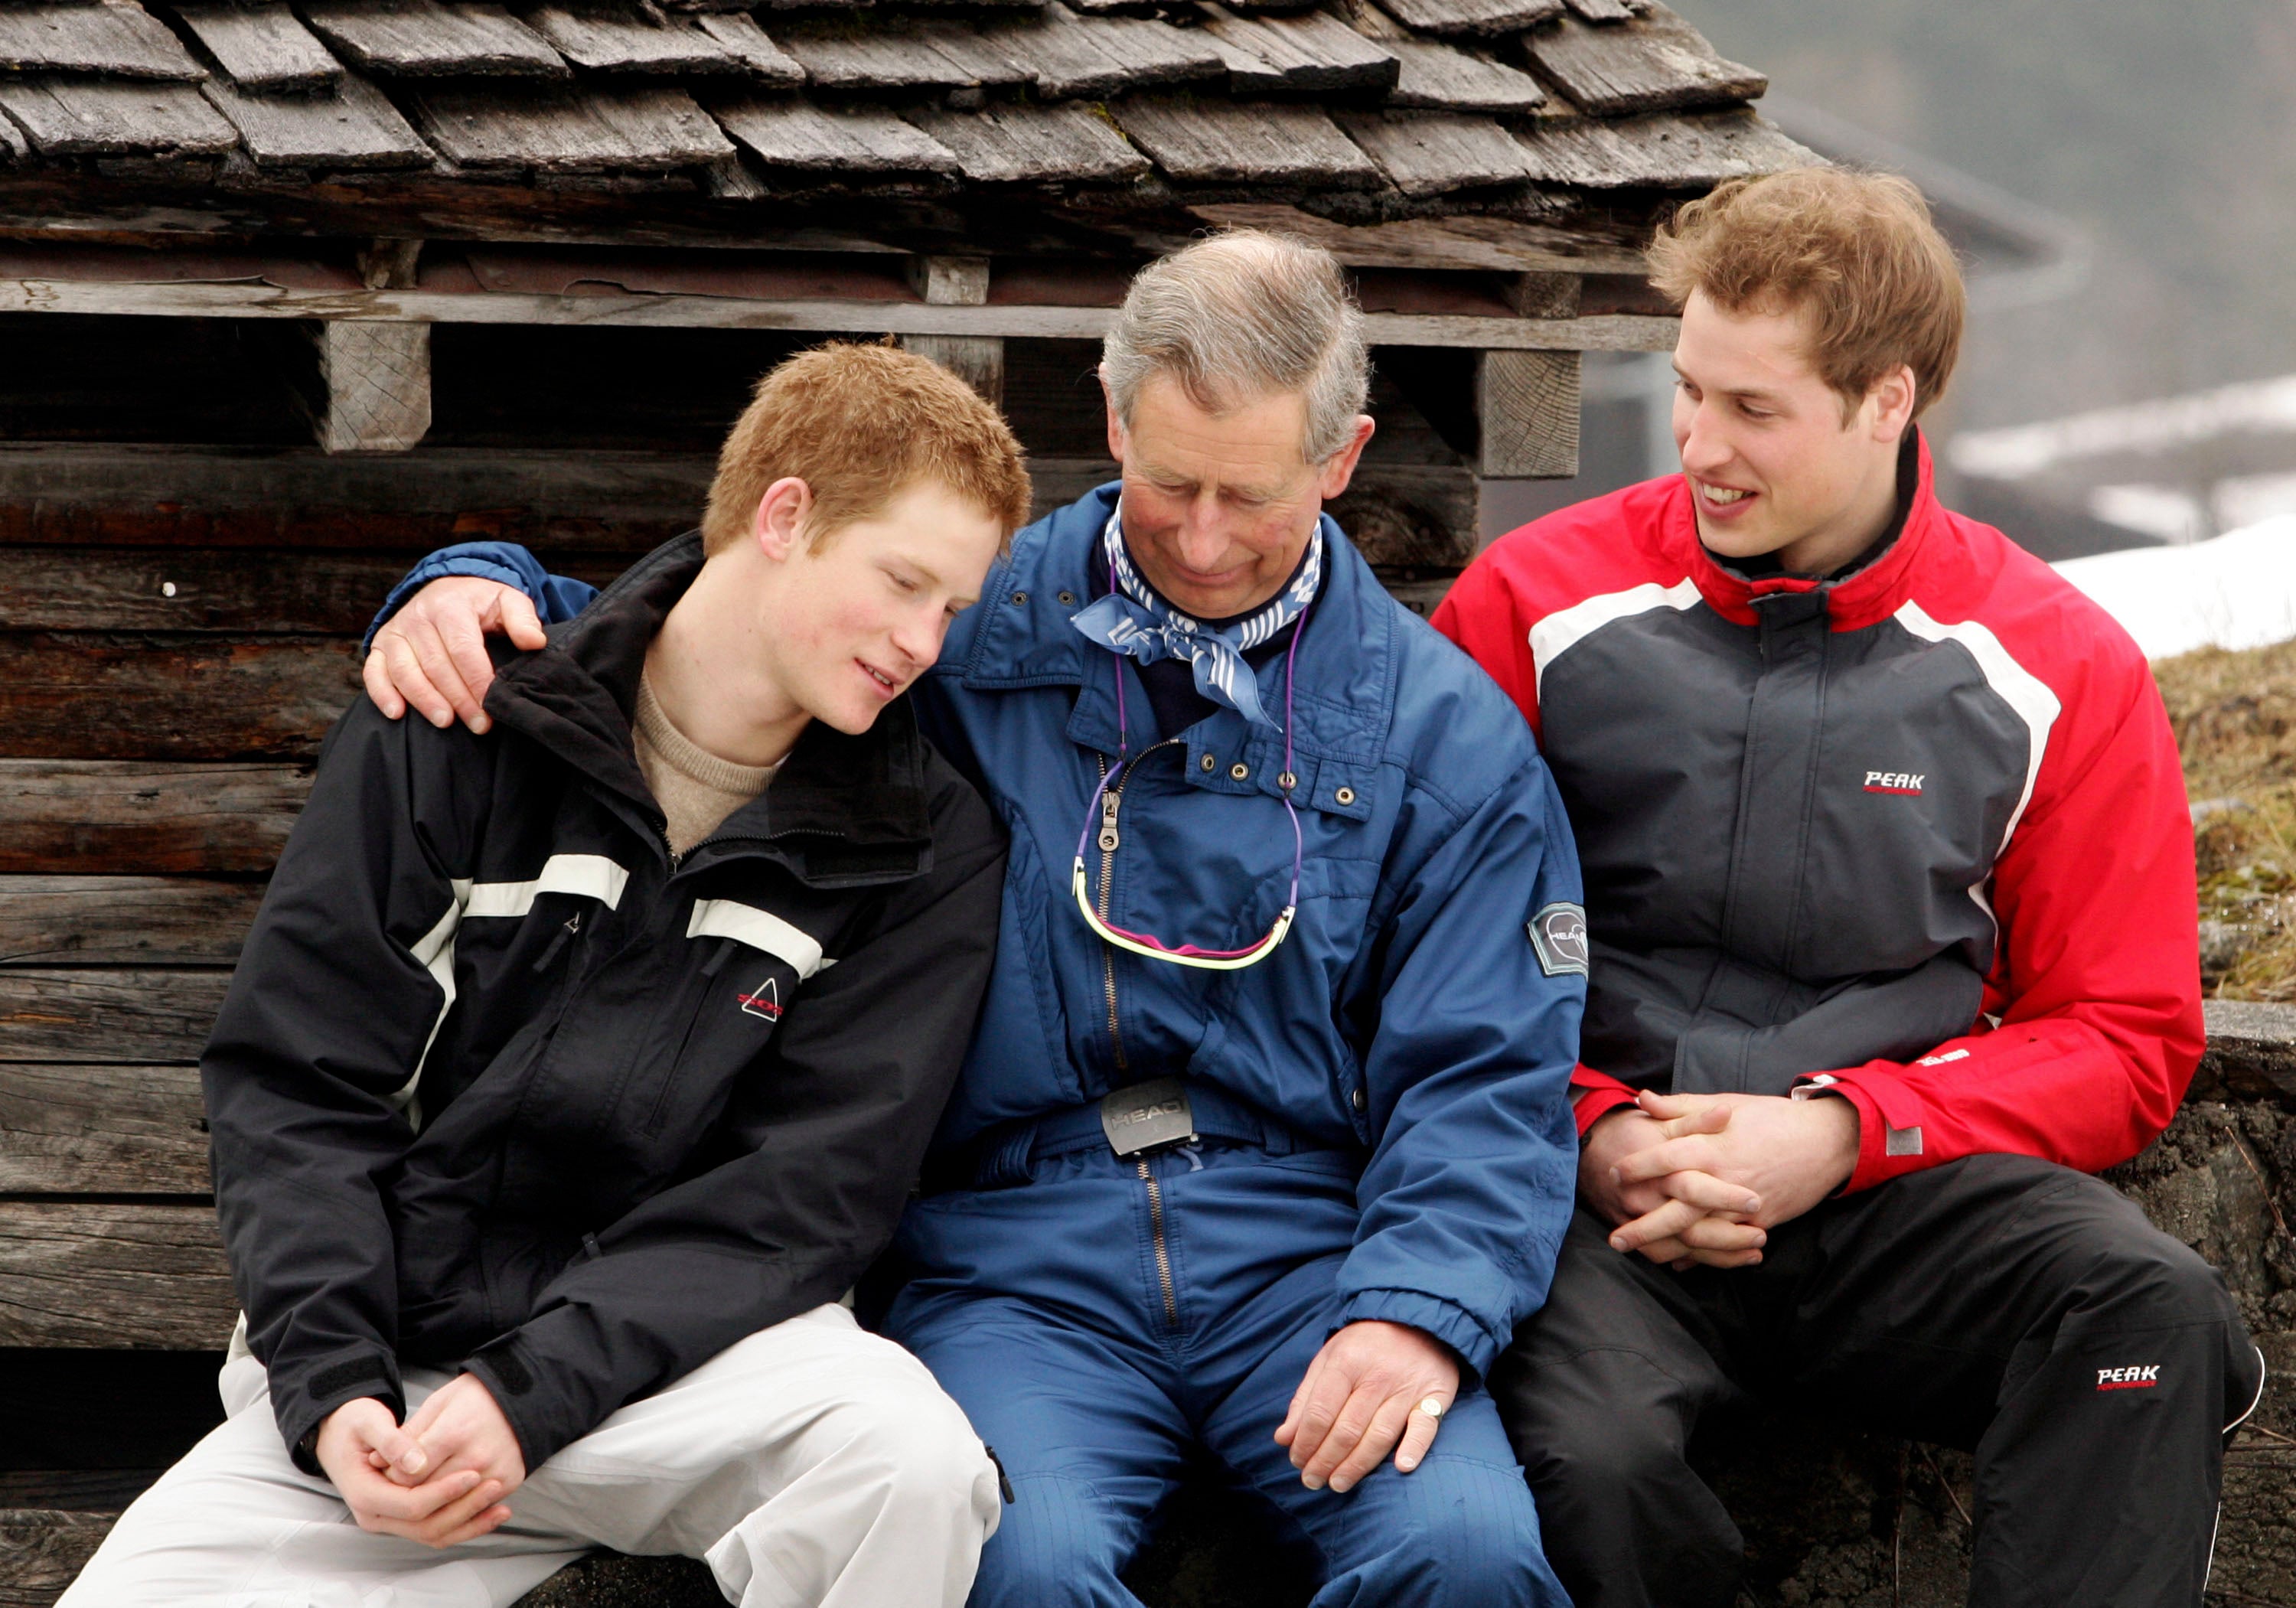 A family once united during the Royal Family's ski break in Switzerland in 2005